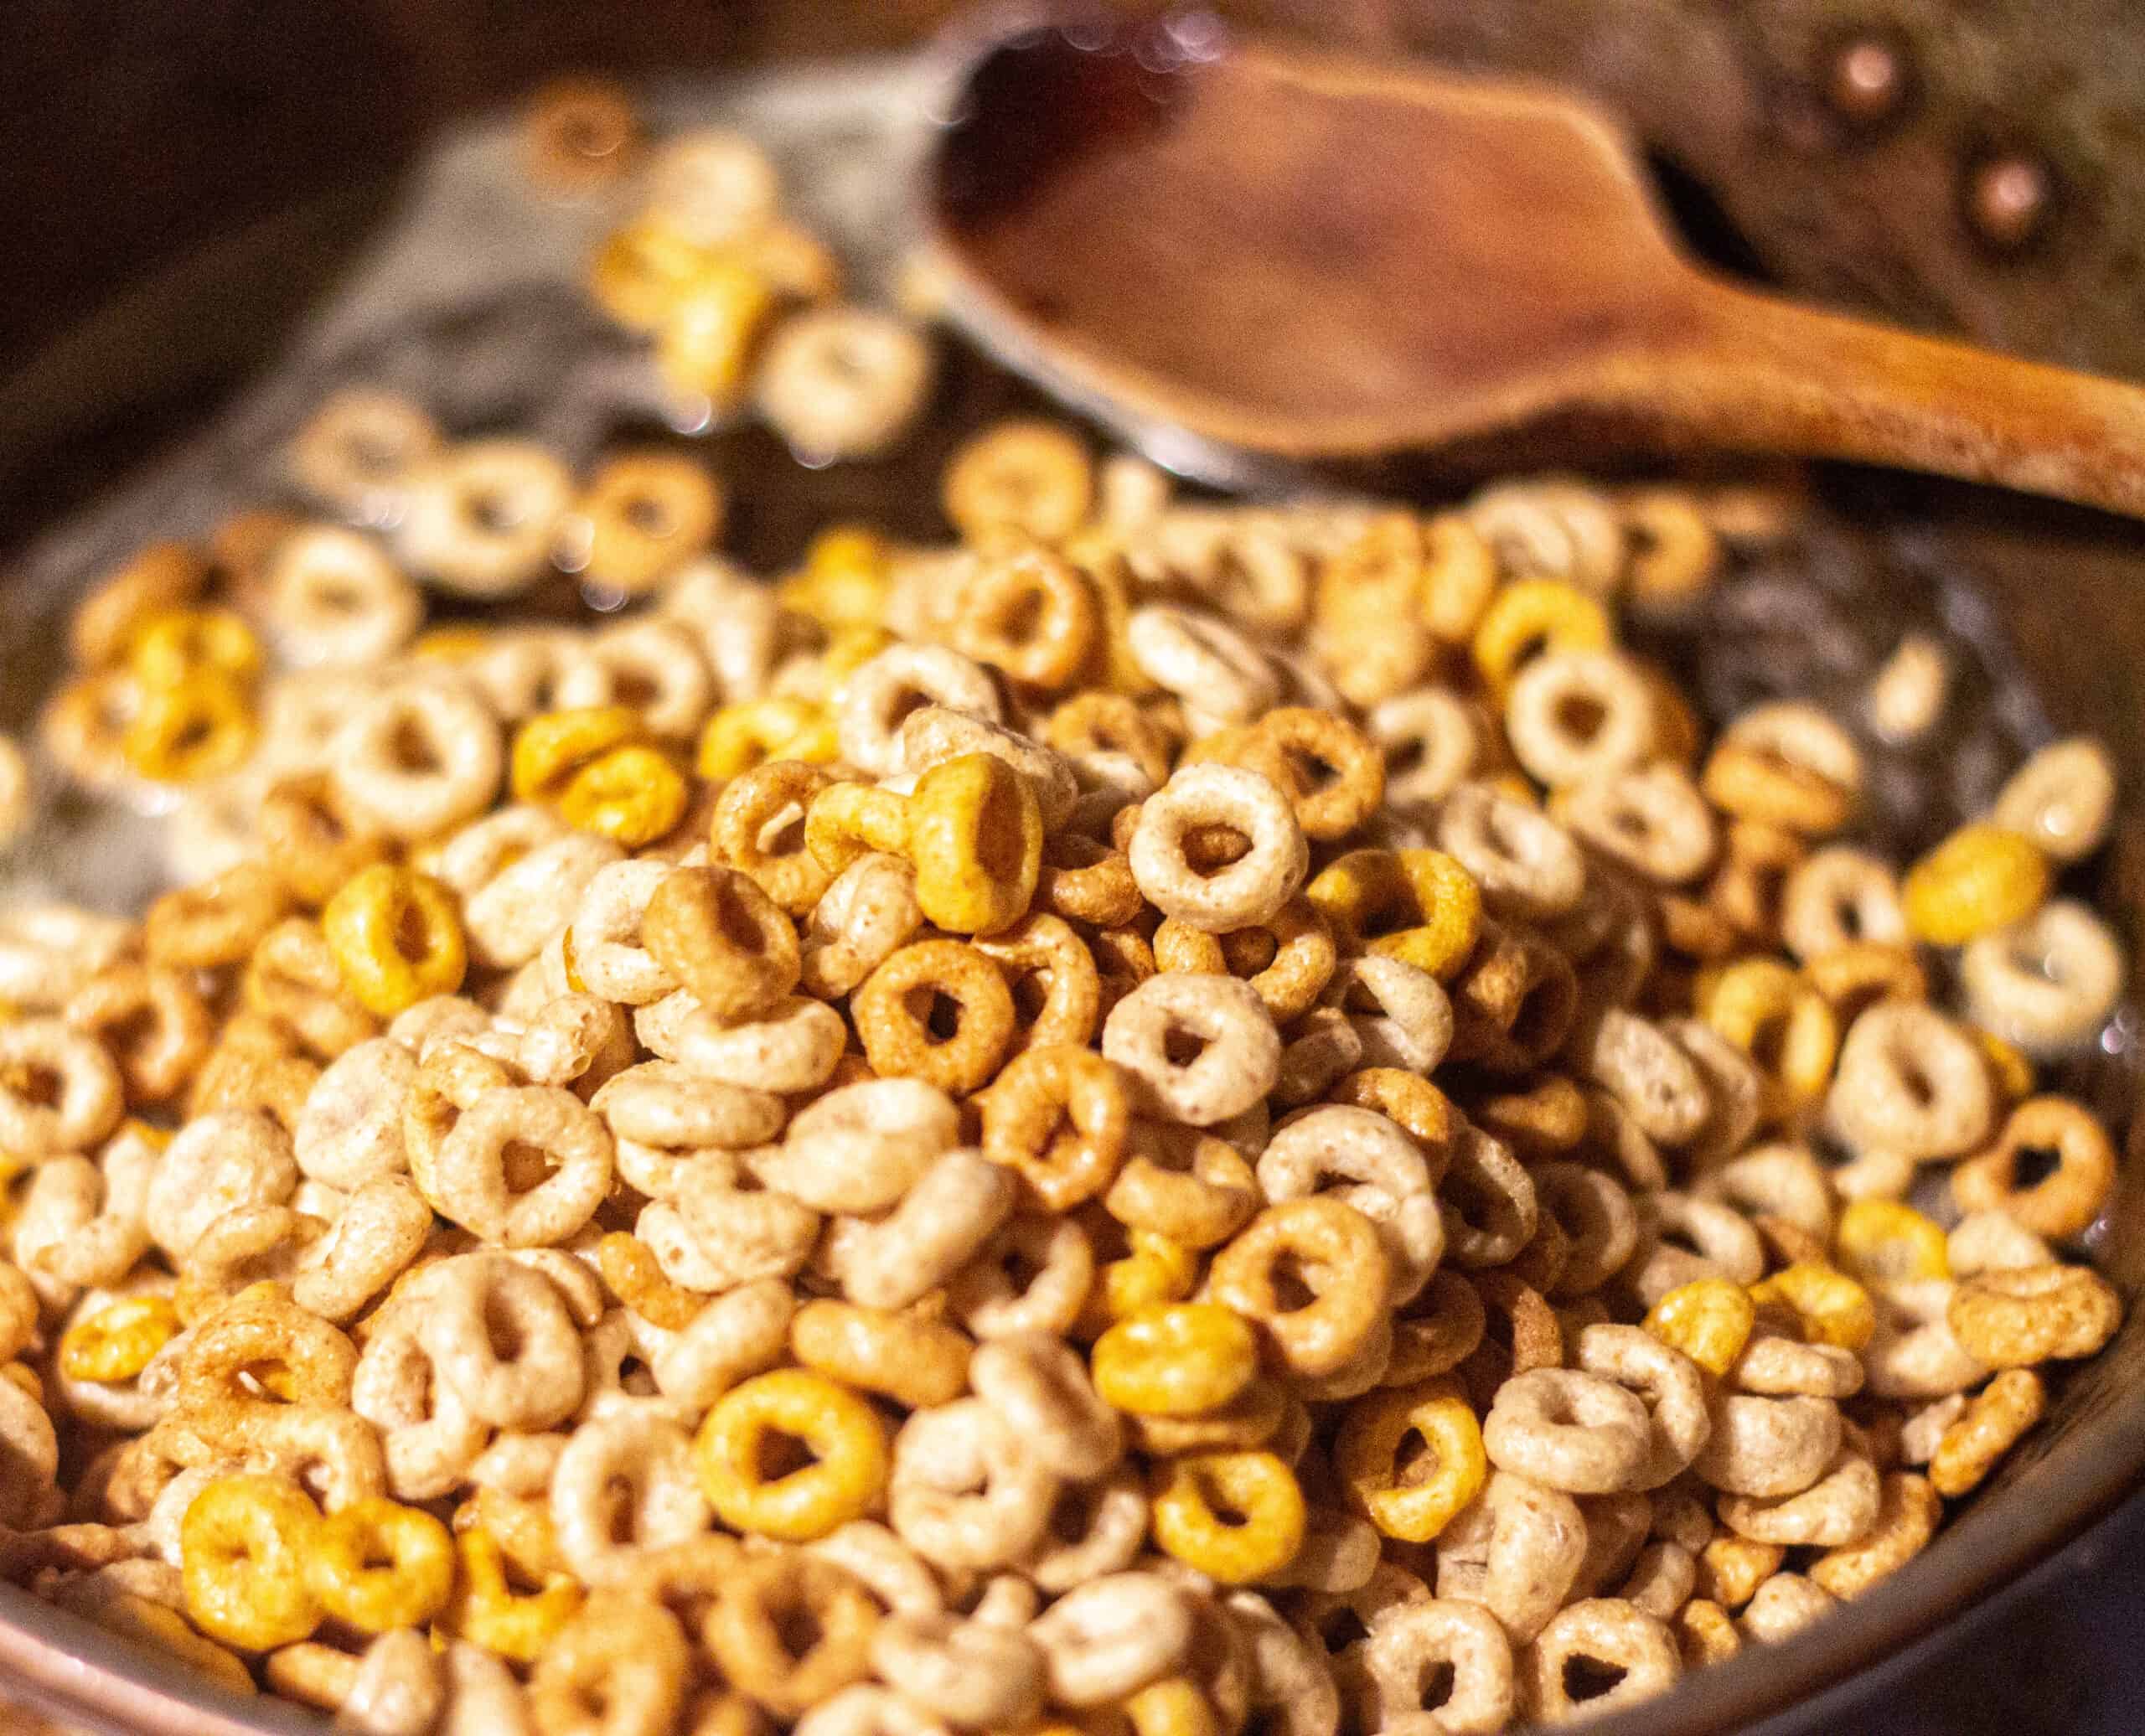 CHeerios in a frying pan with melted butter